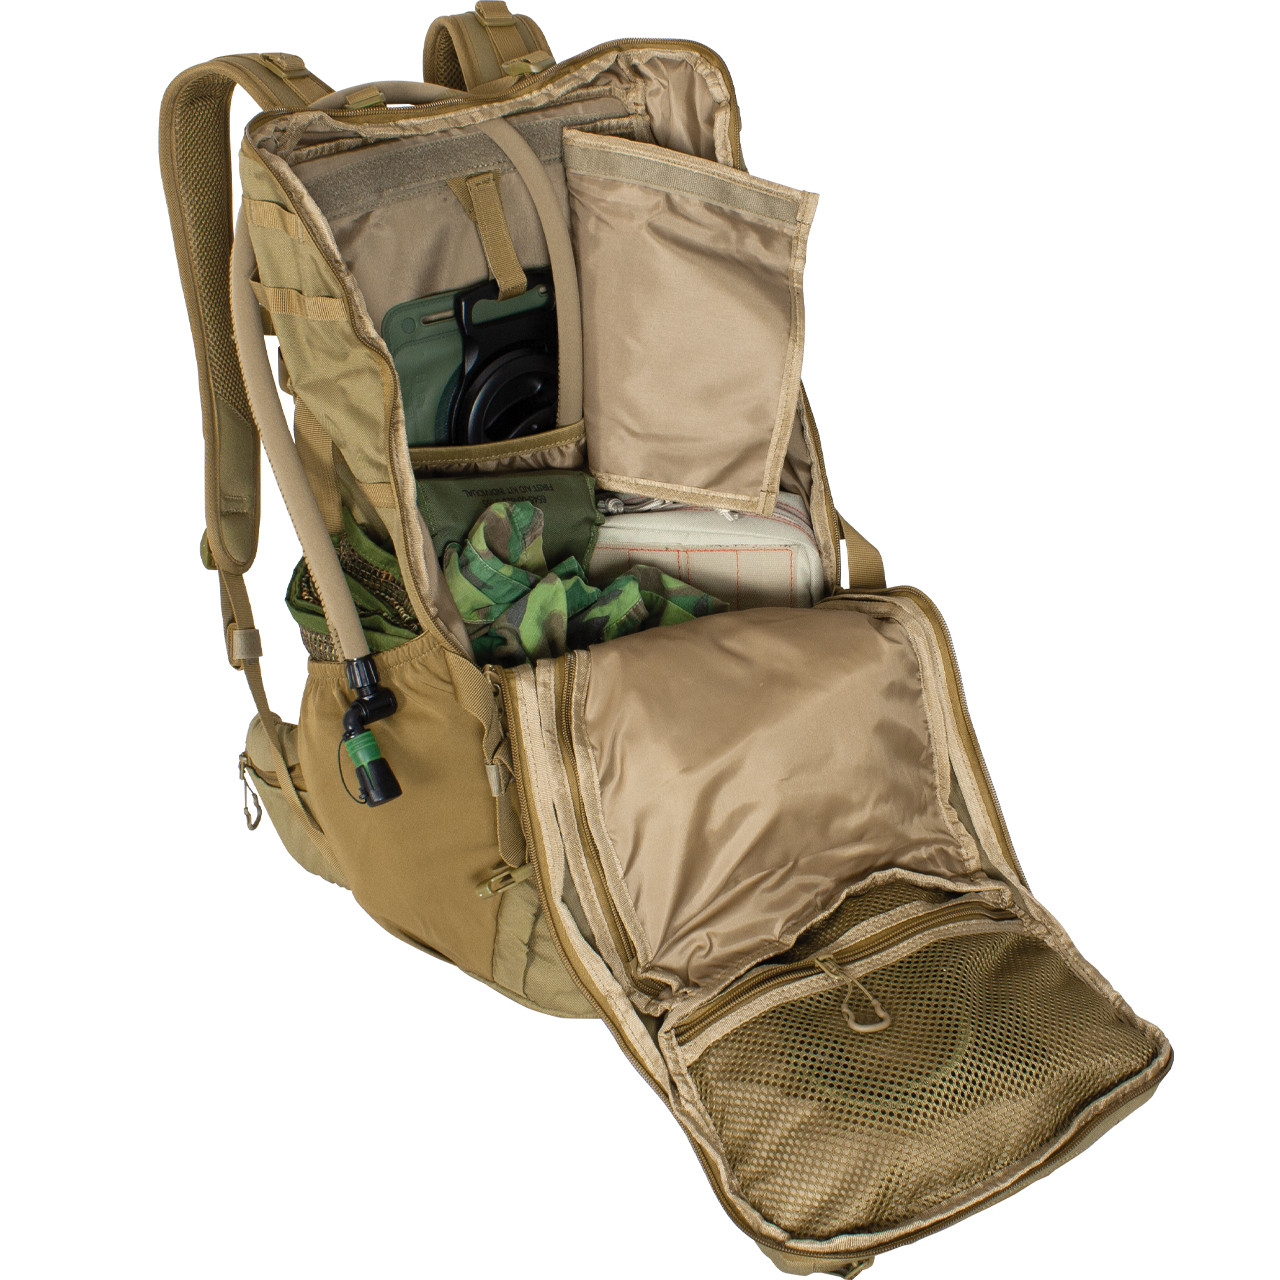 FHIOR - 40 Liter Tactical Pack - Coyote - Inside